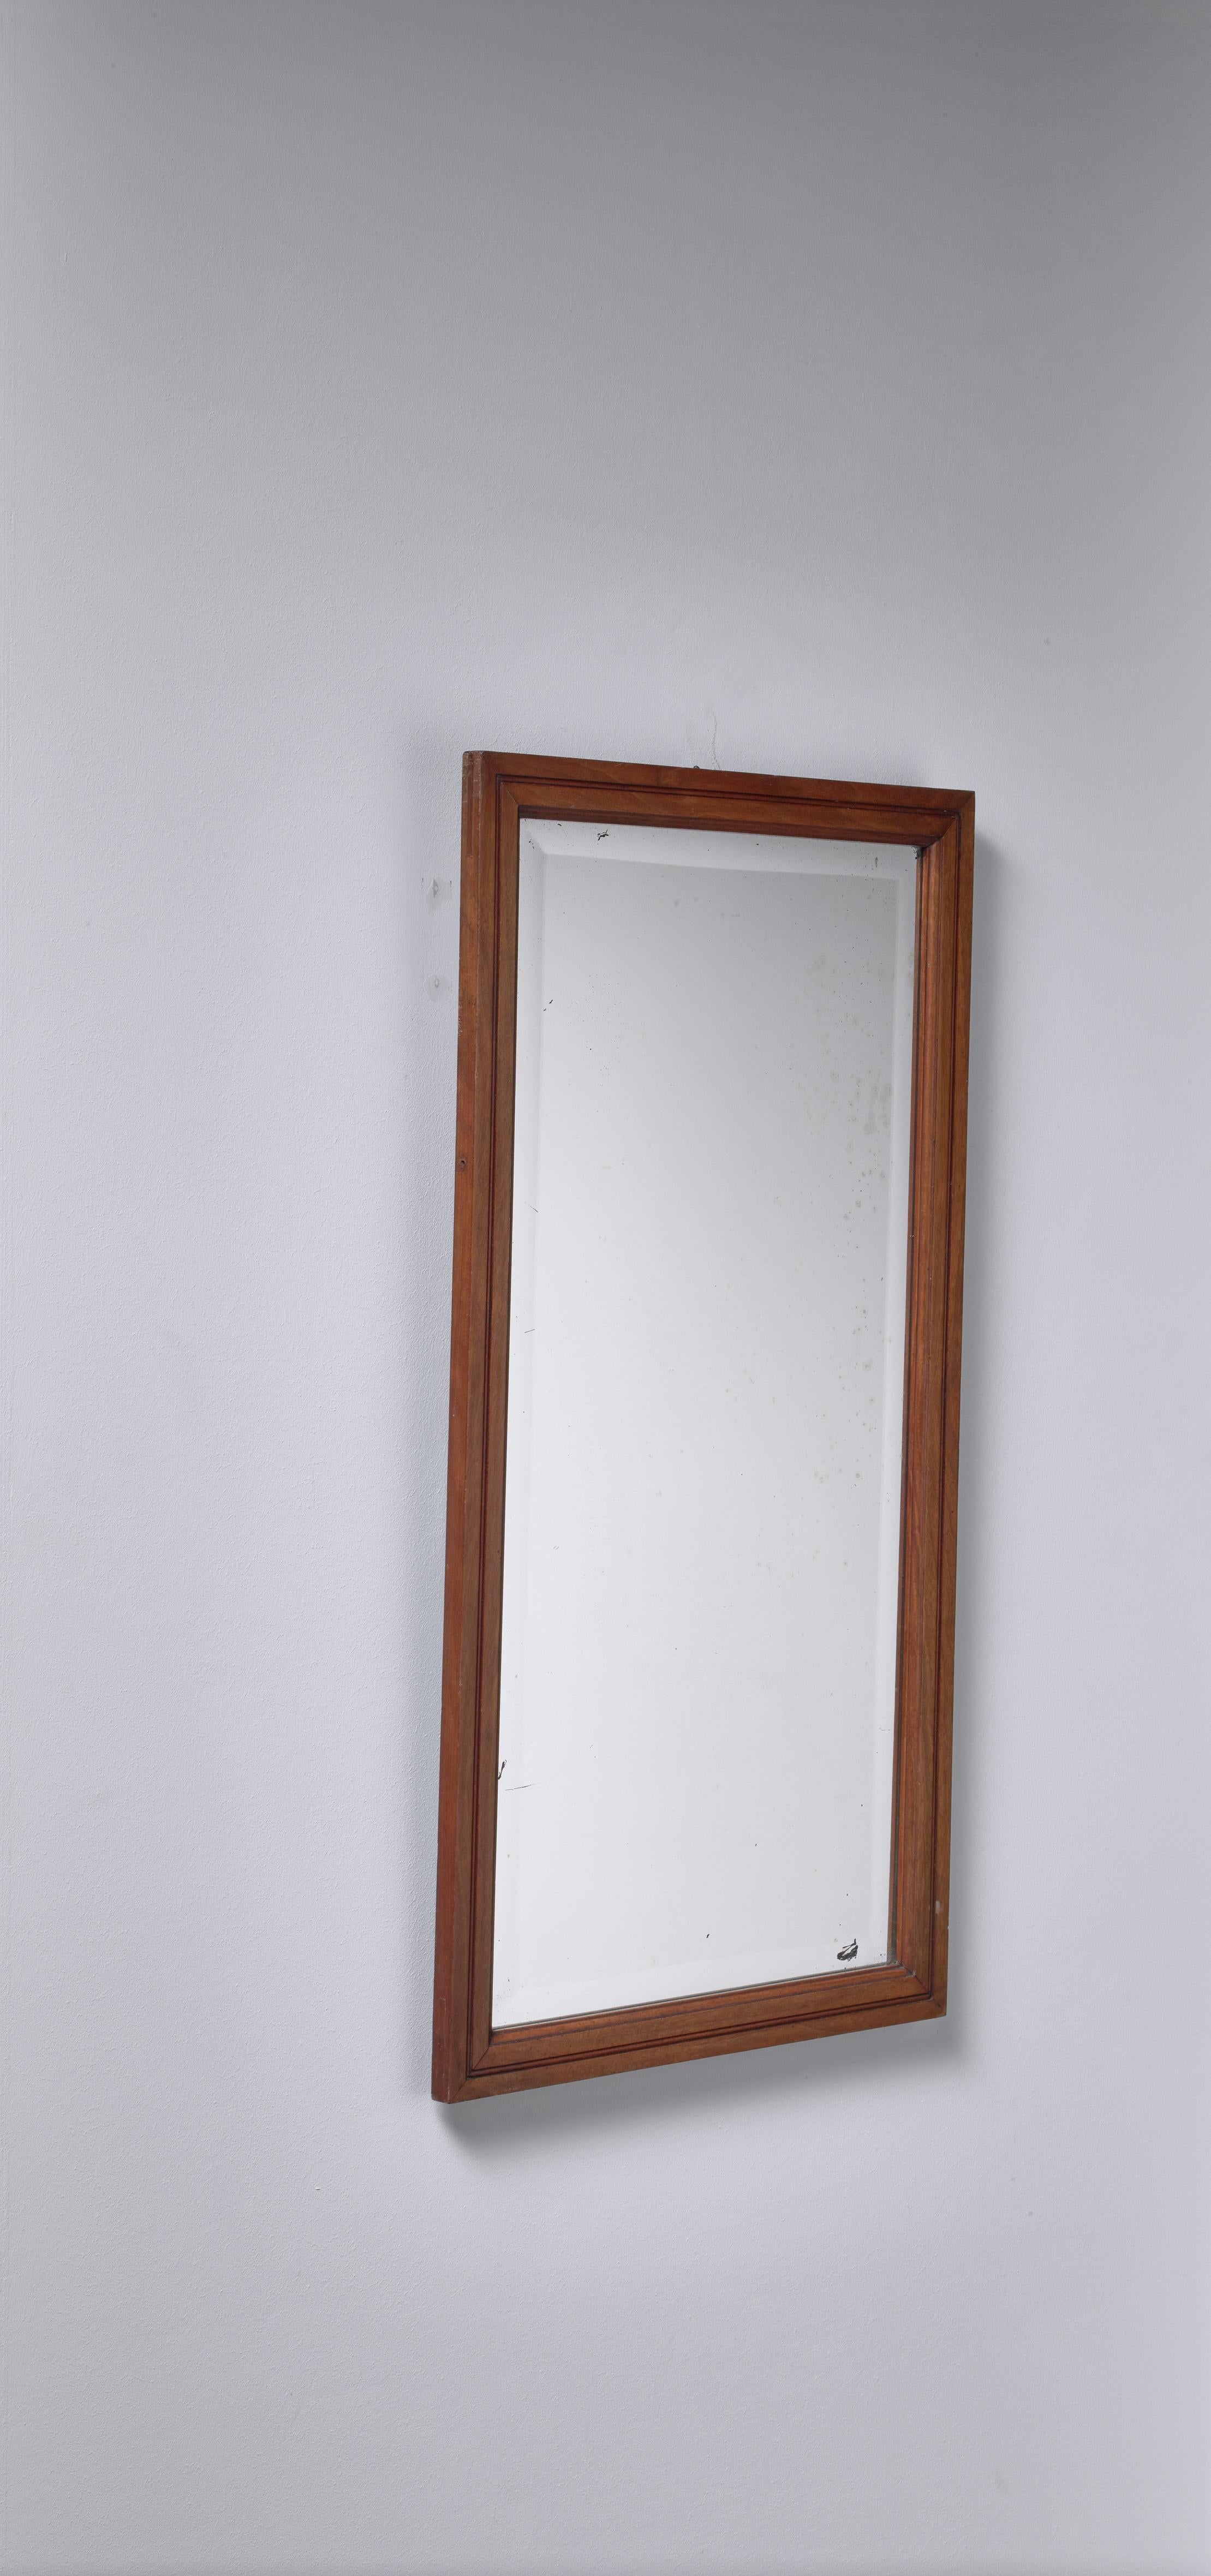 A late 19th century or early 20th century Swedish mirror in a profiled mahogany frame. Ideal to be used in a bathroom or in a hallway.